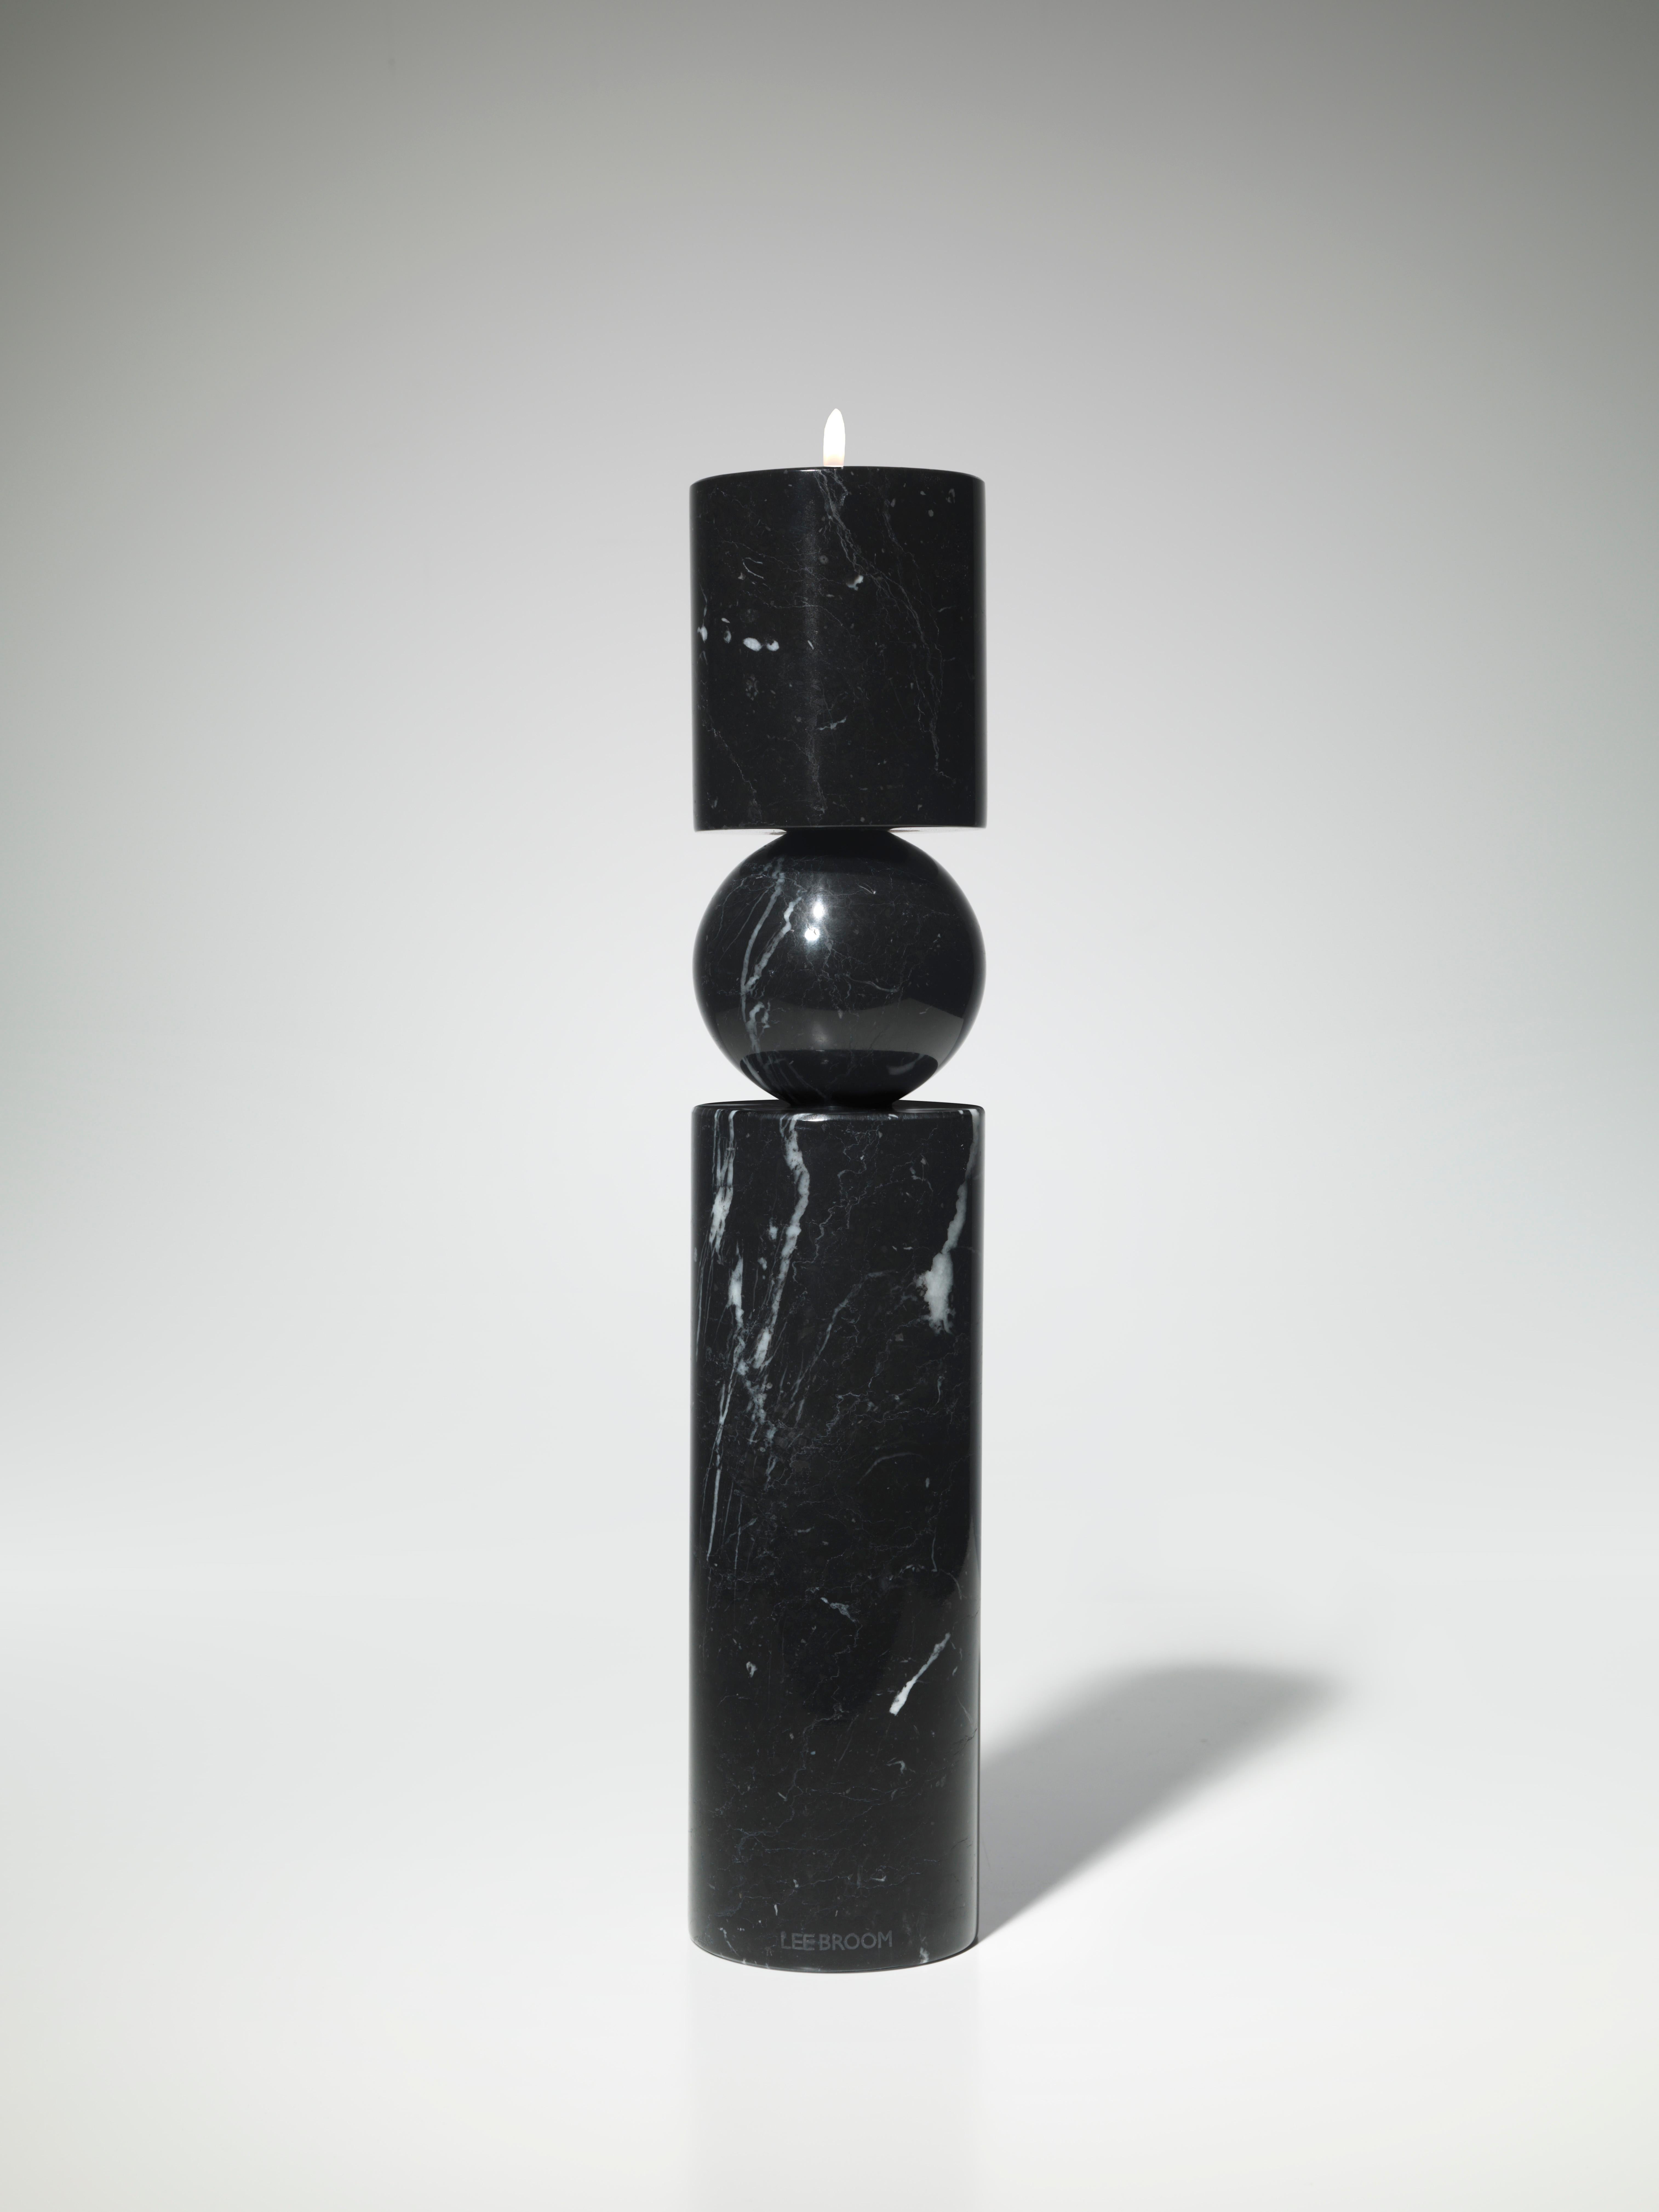 A play on the concept of pivots and supports, Fulcrum is a sculptural and monolithic candlestick whose cylindrical stem appears to balance on a central sphere. 

Includes large clear cup tealight candle.